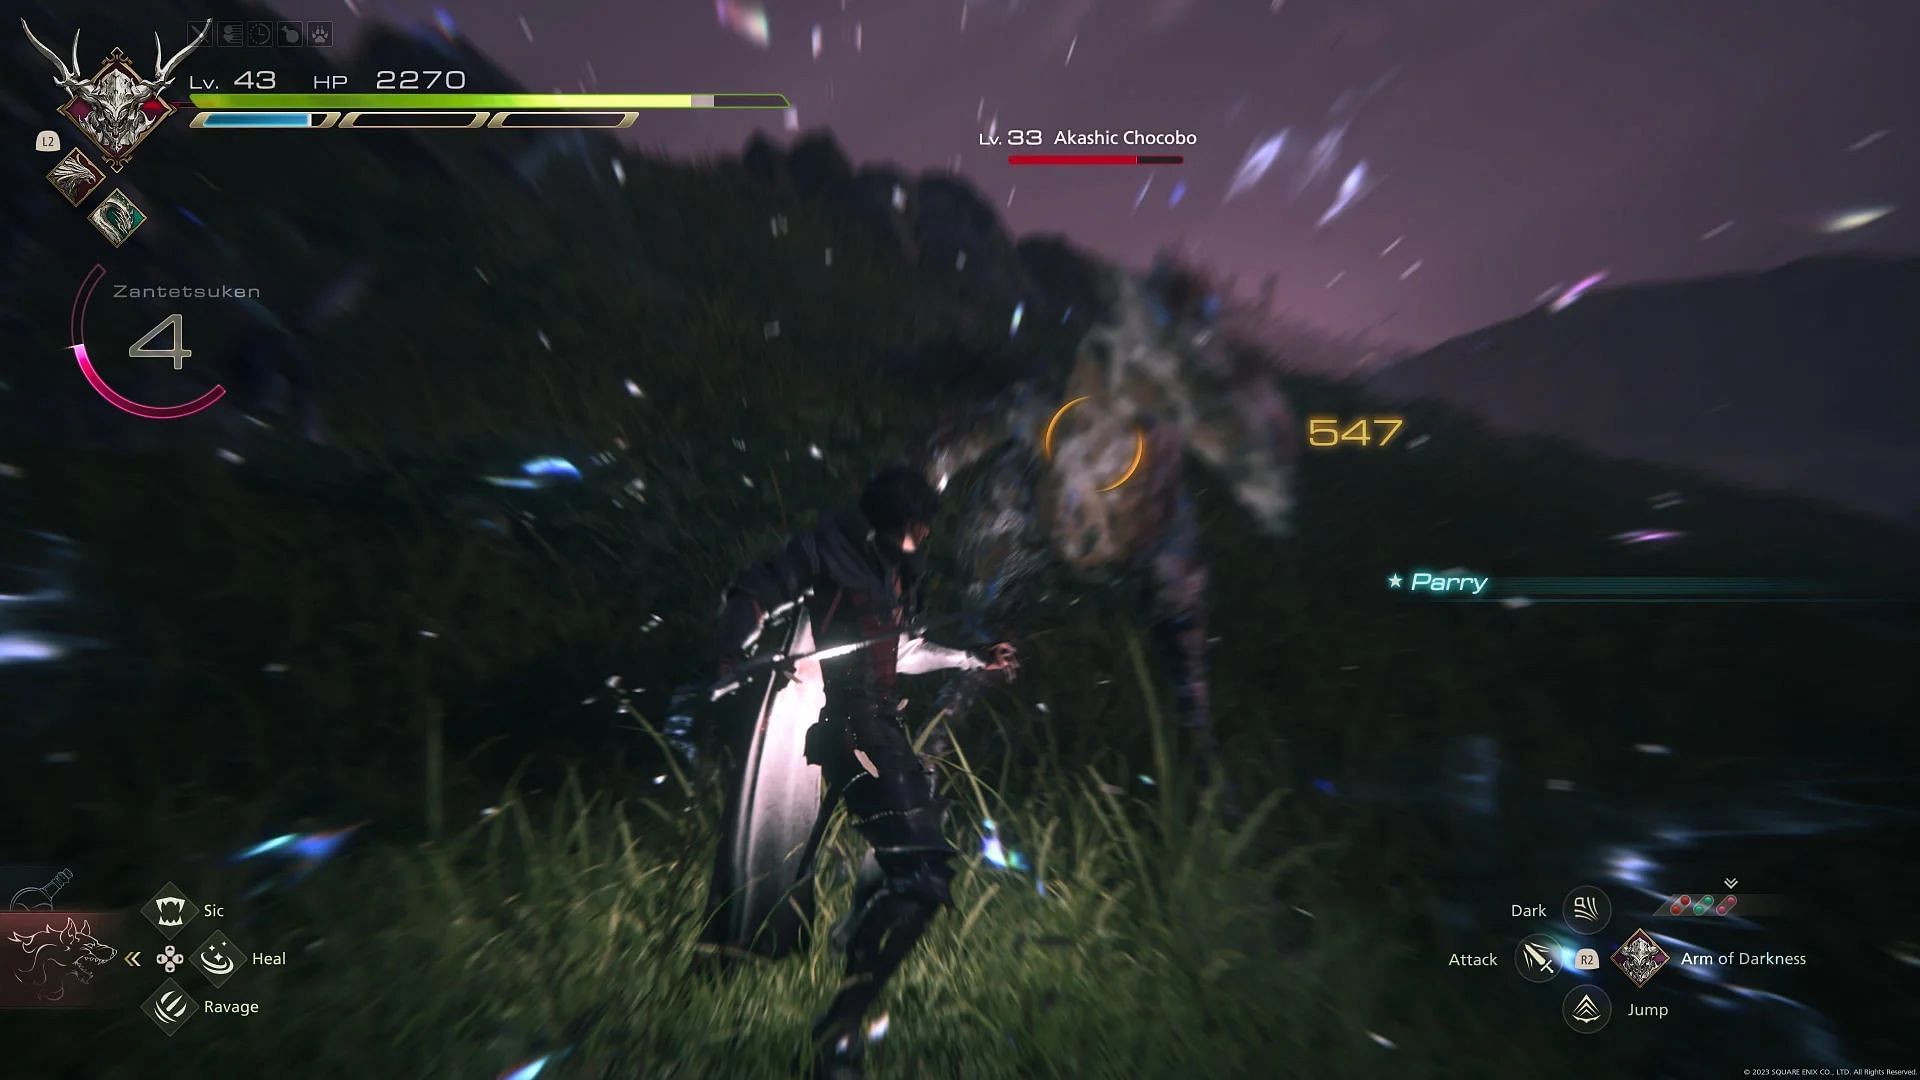 The Arm of Darkness in-action in Final Fantasy 16 (Image via Square Enix)